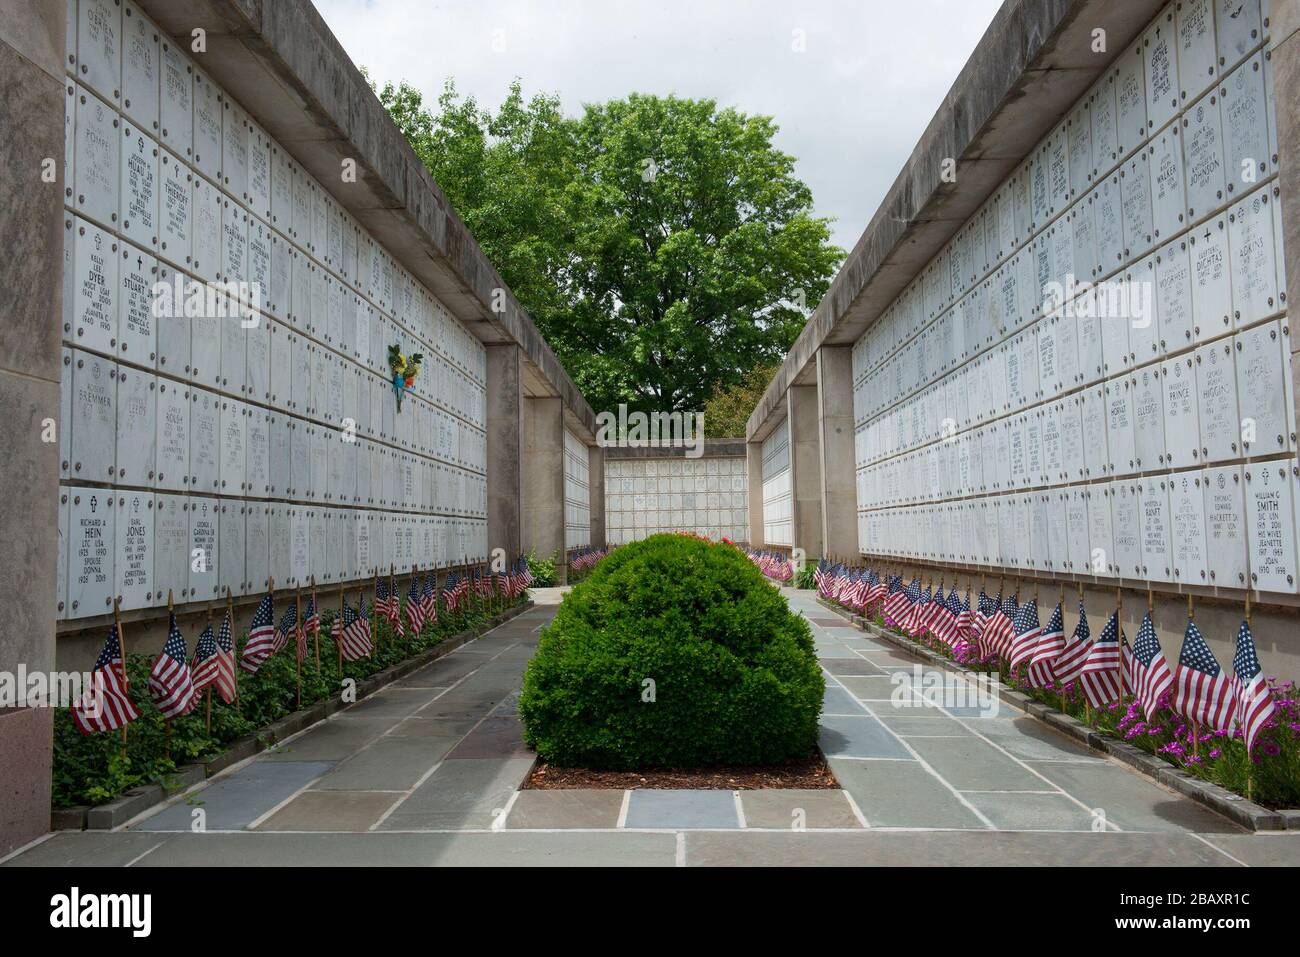 'Flags line The Columbarium Court 2 of Arlington National Cemetery for Flags-In, Arlington, Va., May 25, 2017.  Over 280,000 American flags are placed at each headstone in the cemetery before Memorial Day. (U.S. Army Photo by Elizabeth Fraser/Arlington National Cemetery/released); 25 May 2017, 13:06; Members of the 3d U.S. Infantry Regiment (The Old Guard) Participte in Flags-In - May 25, 2017; Arlington National Cemetery; ' Stock Photo